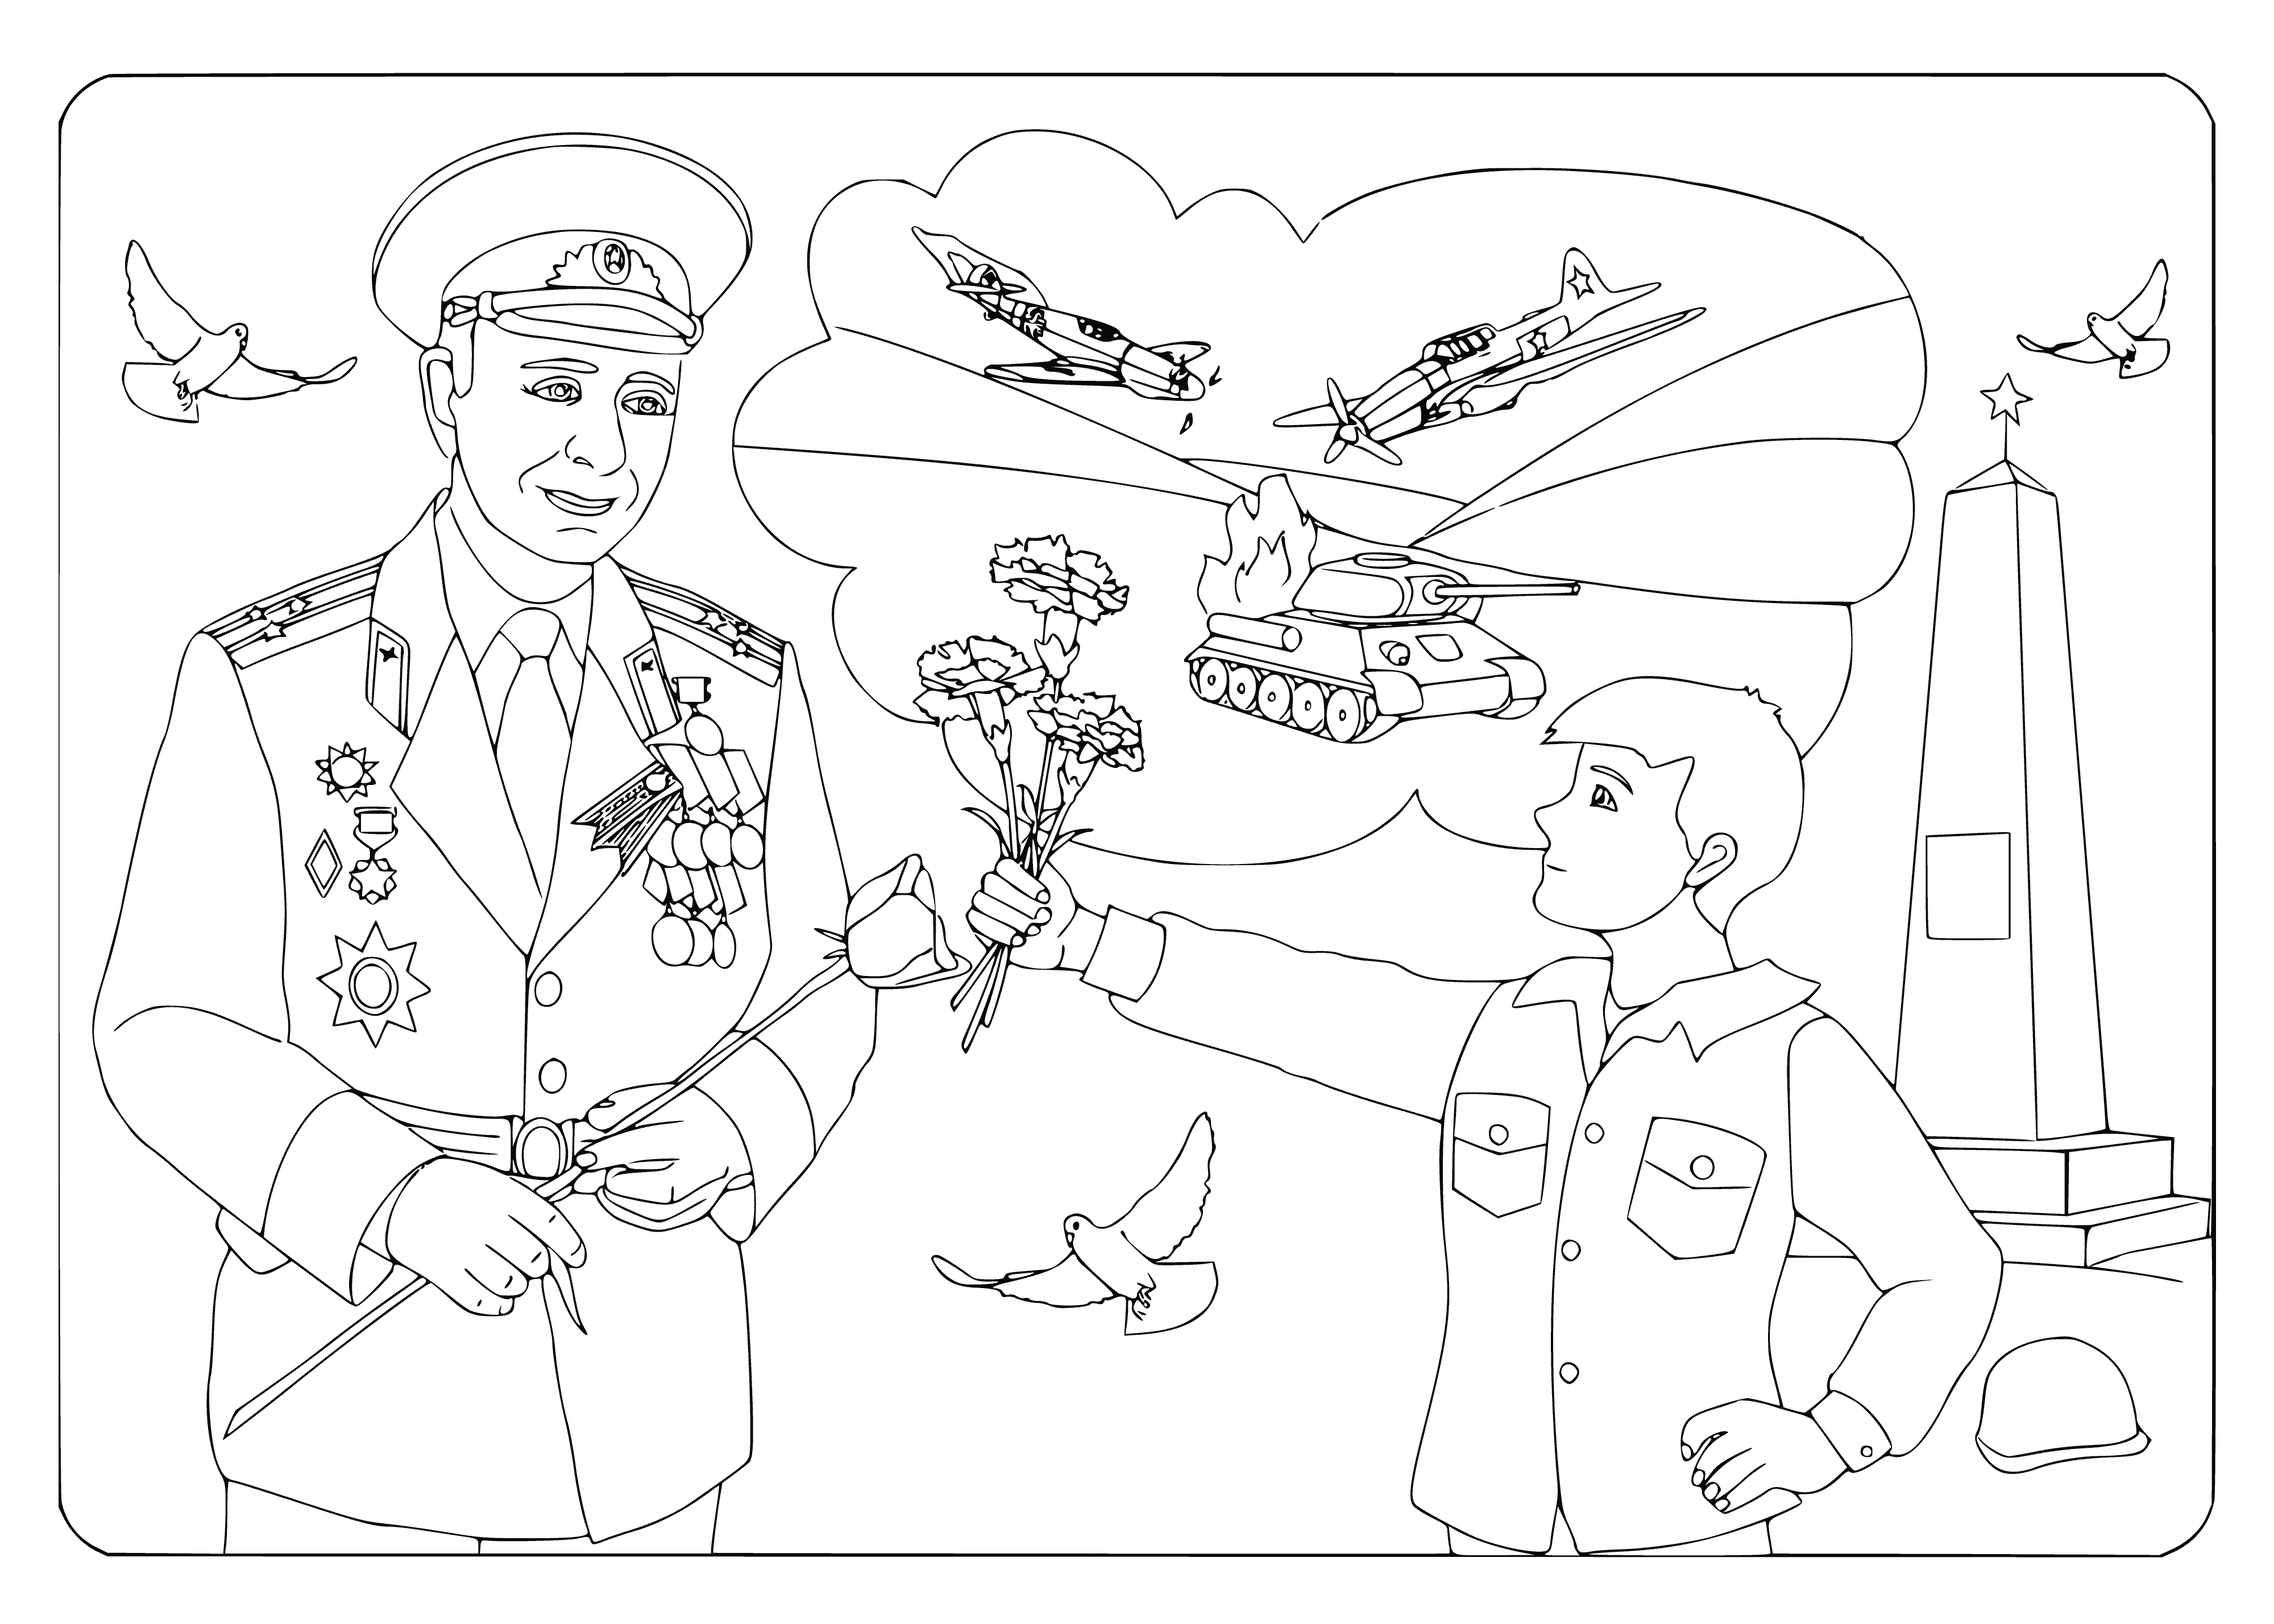 Veteran on Victory Day coloring page